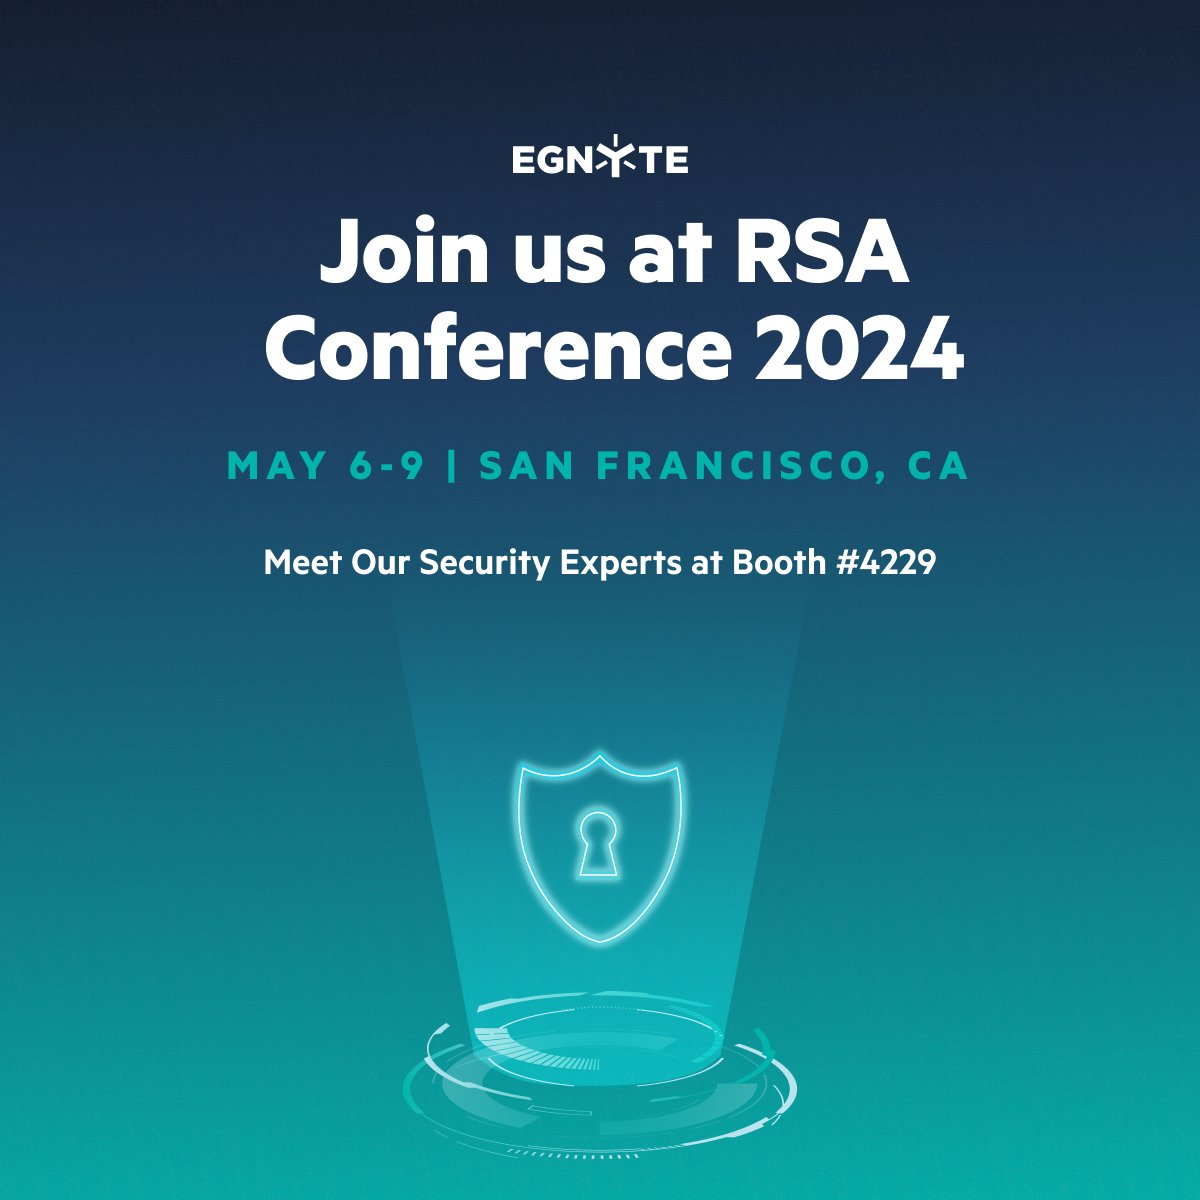 Excited to be part of the @Egnyte team at #RSAConference2024! 🔐 

Join us for the latest in data security, live demos, and expert chats. Book a 1:1 to revolutionize your security approach. 

Let’s make data protection a top priority! 🚀 #Cybersecurity bit.ly/44f0TKL